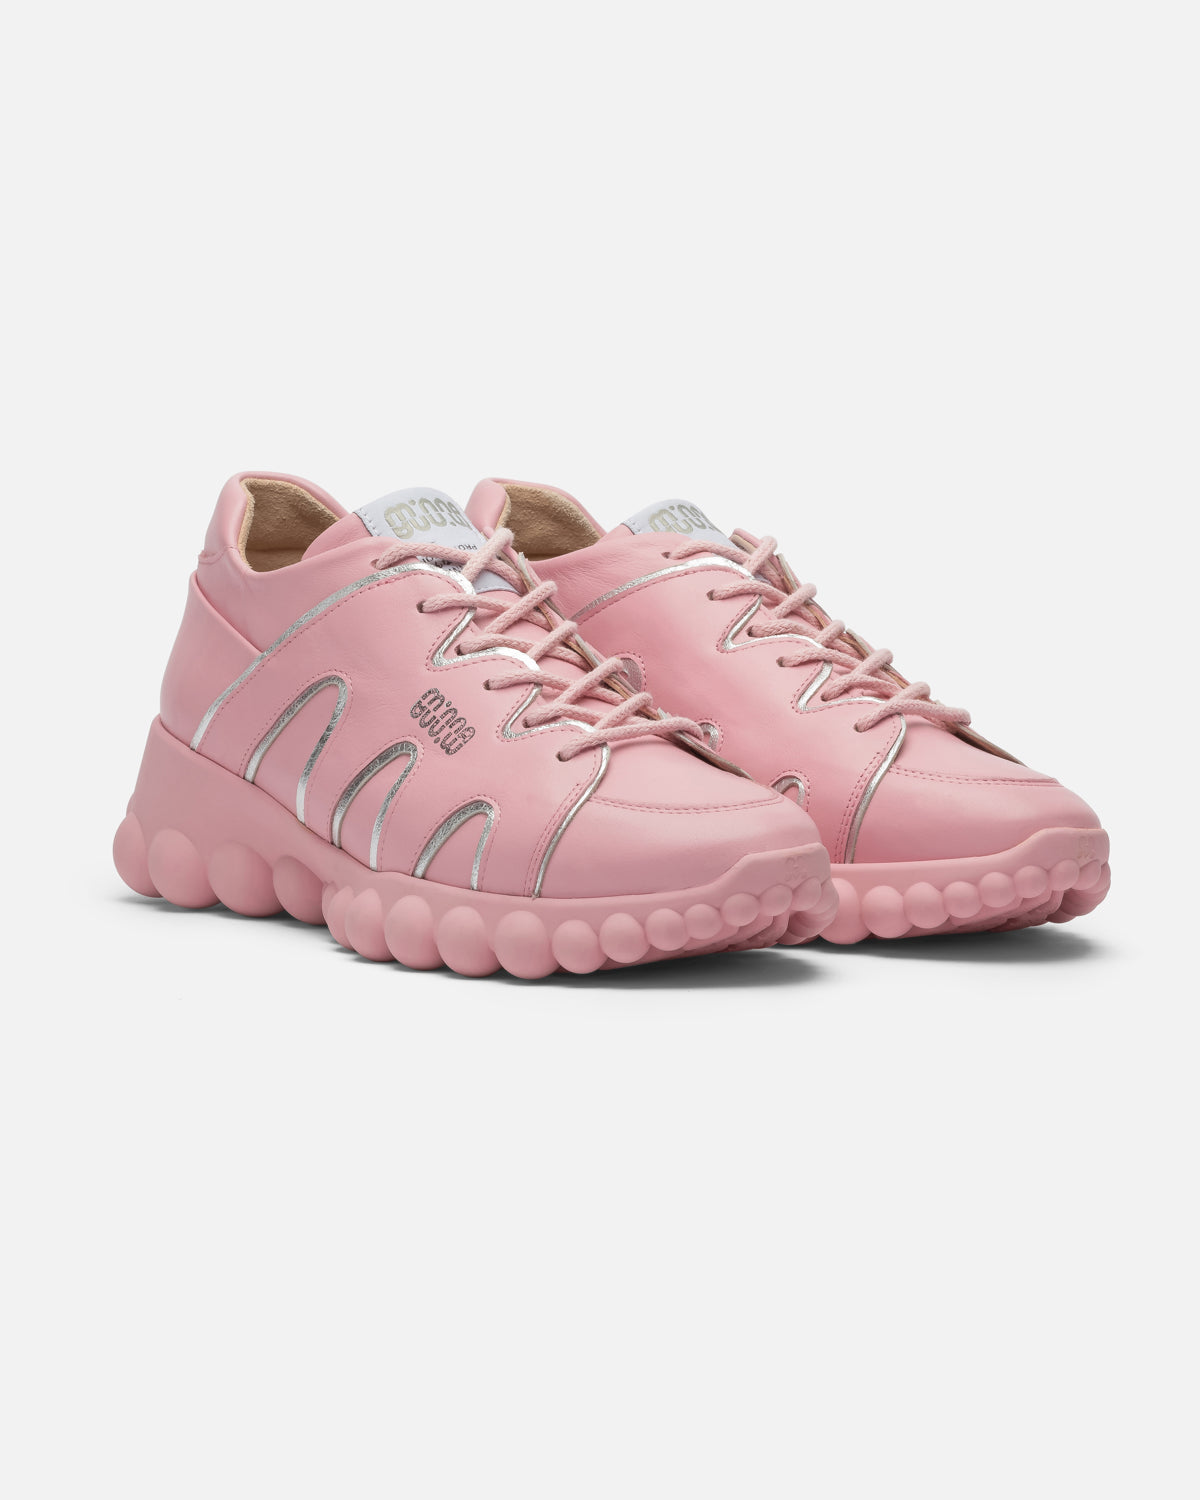 Chain Reaction Pink Leather